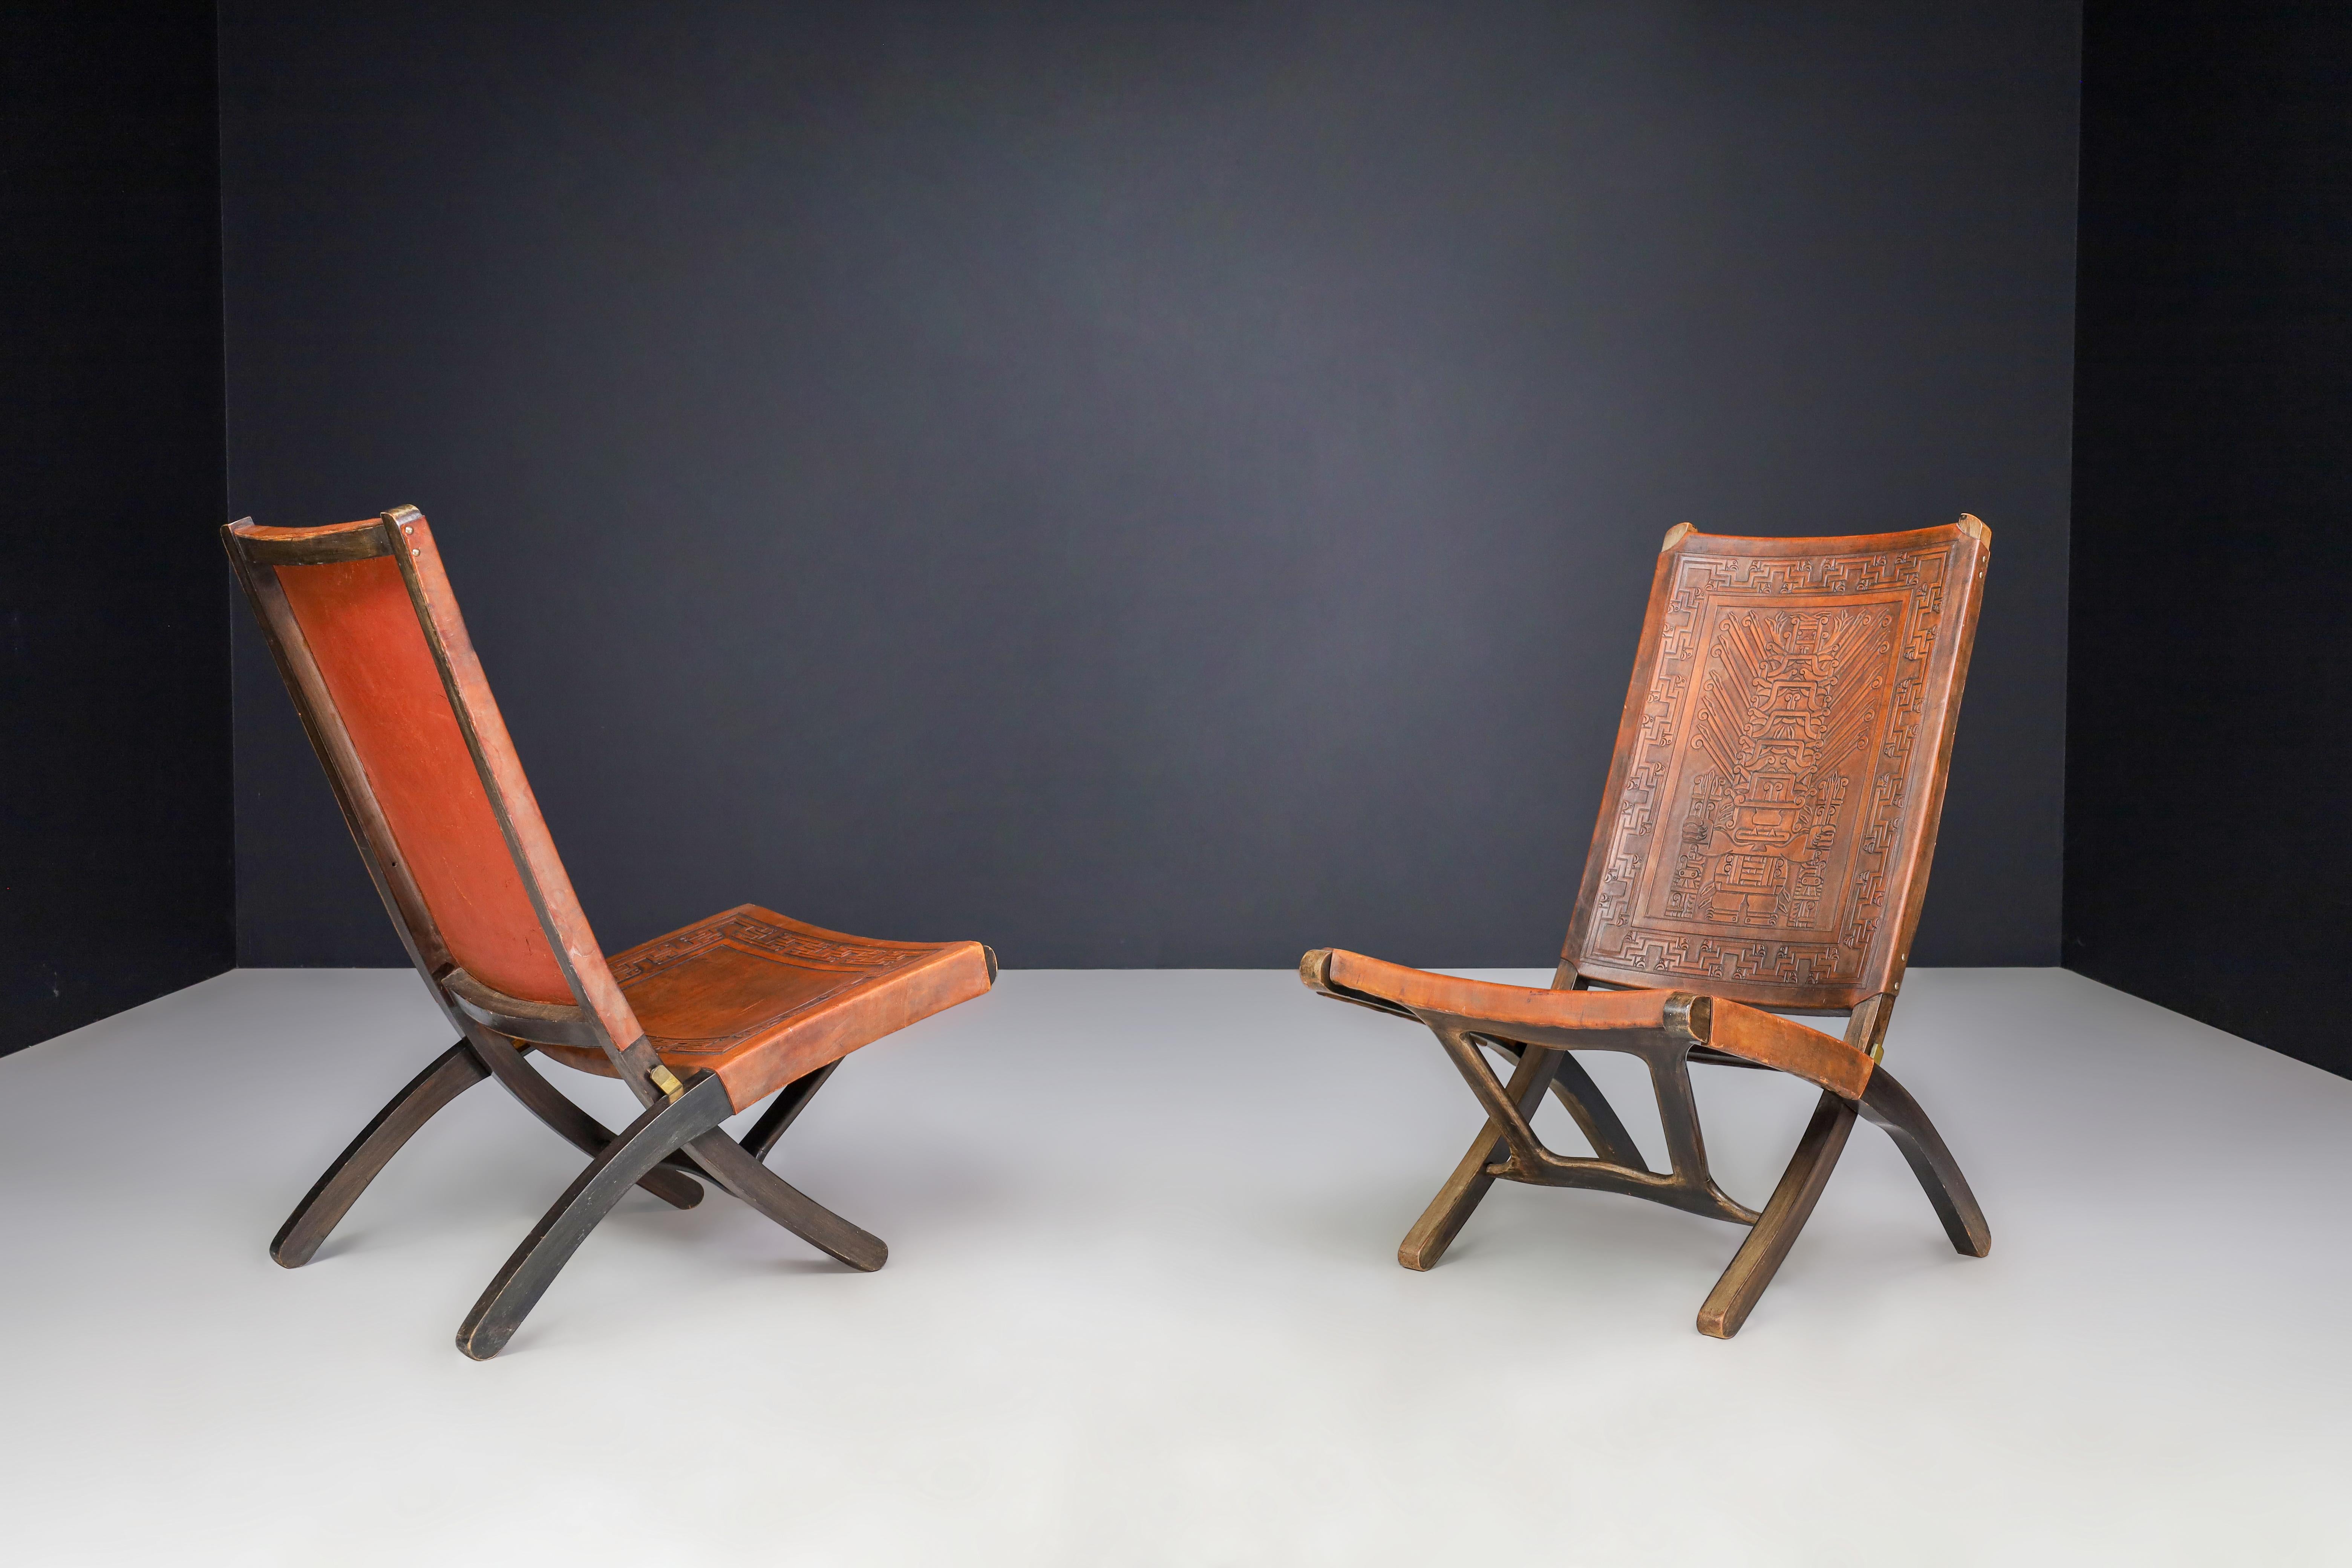 Angel I. Pazmino Cognac-colored Saddle Leather Folding Chairs Ecuador 1970s   For Sale 1